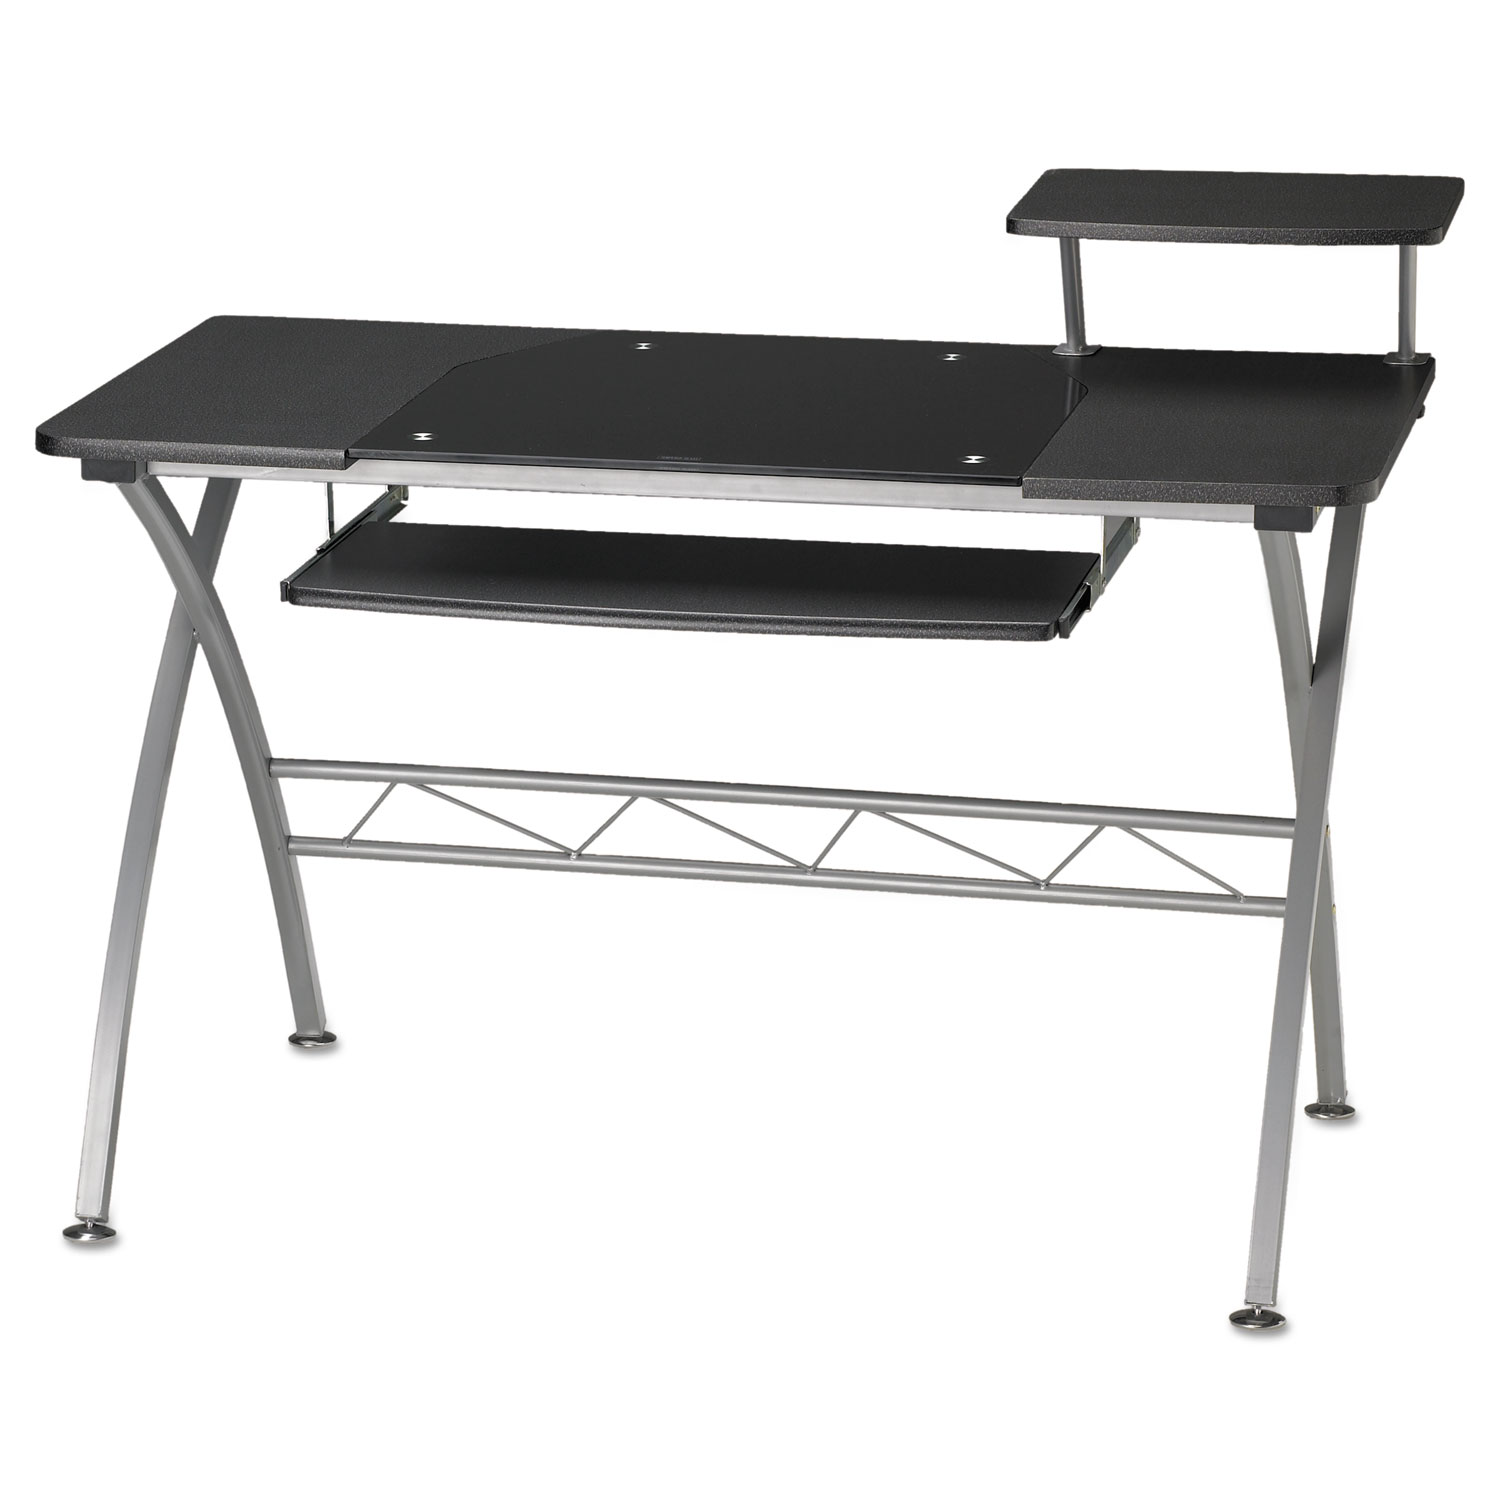 Eastwinds Vision Computer Desk, 47-1/4w x 27d x 34h, Anthracite with Black Glass